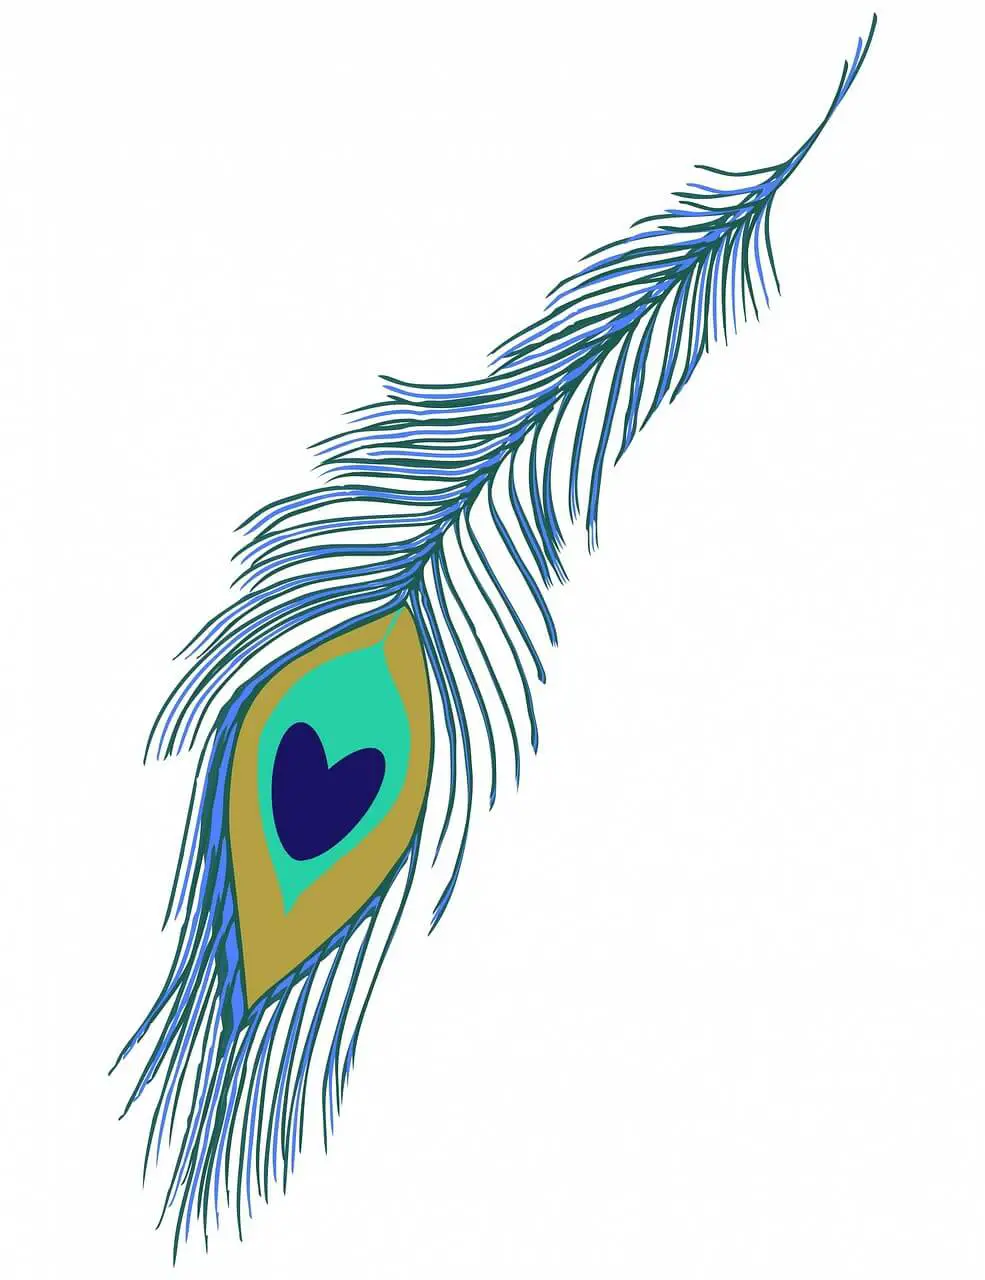 How to Draw a Peacock Feather - Step by Step